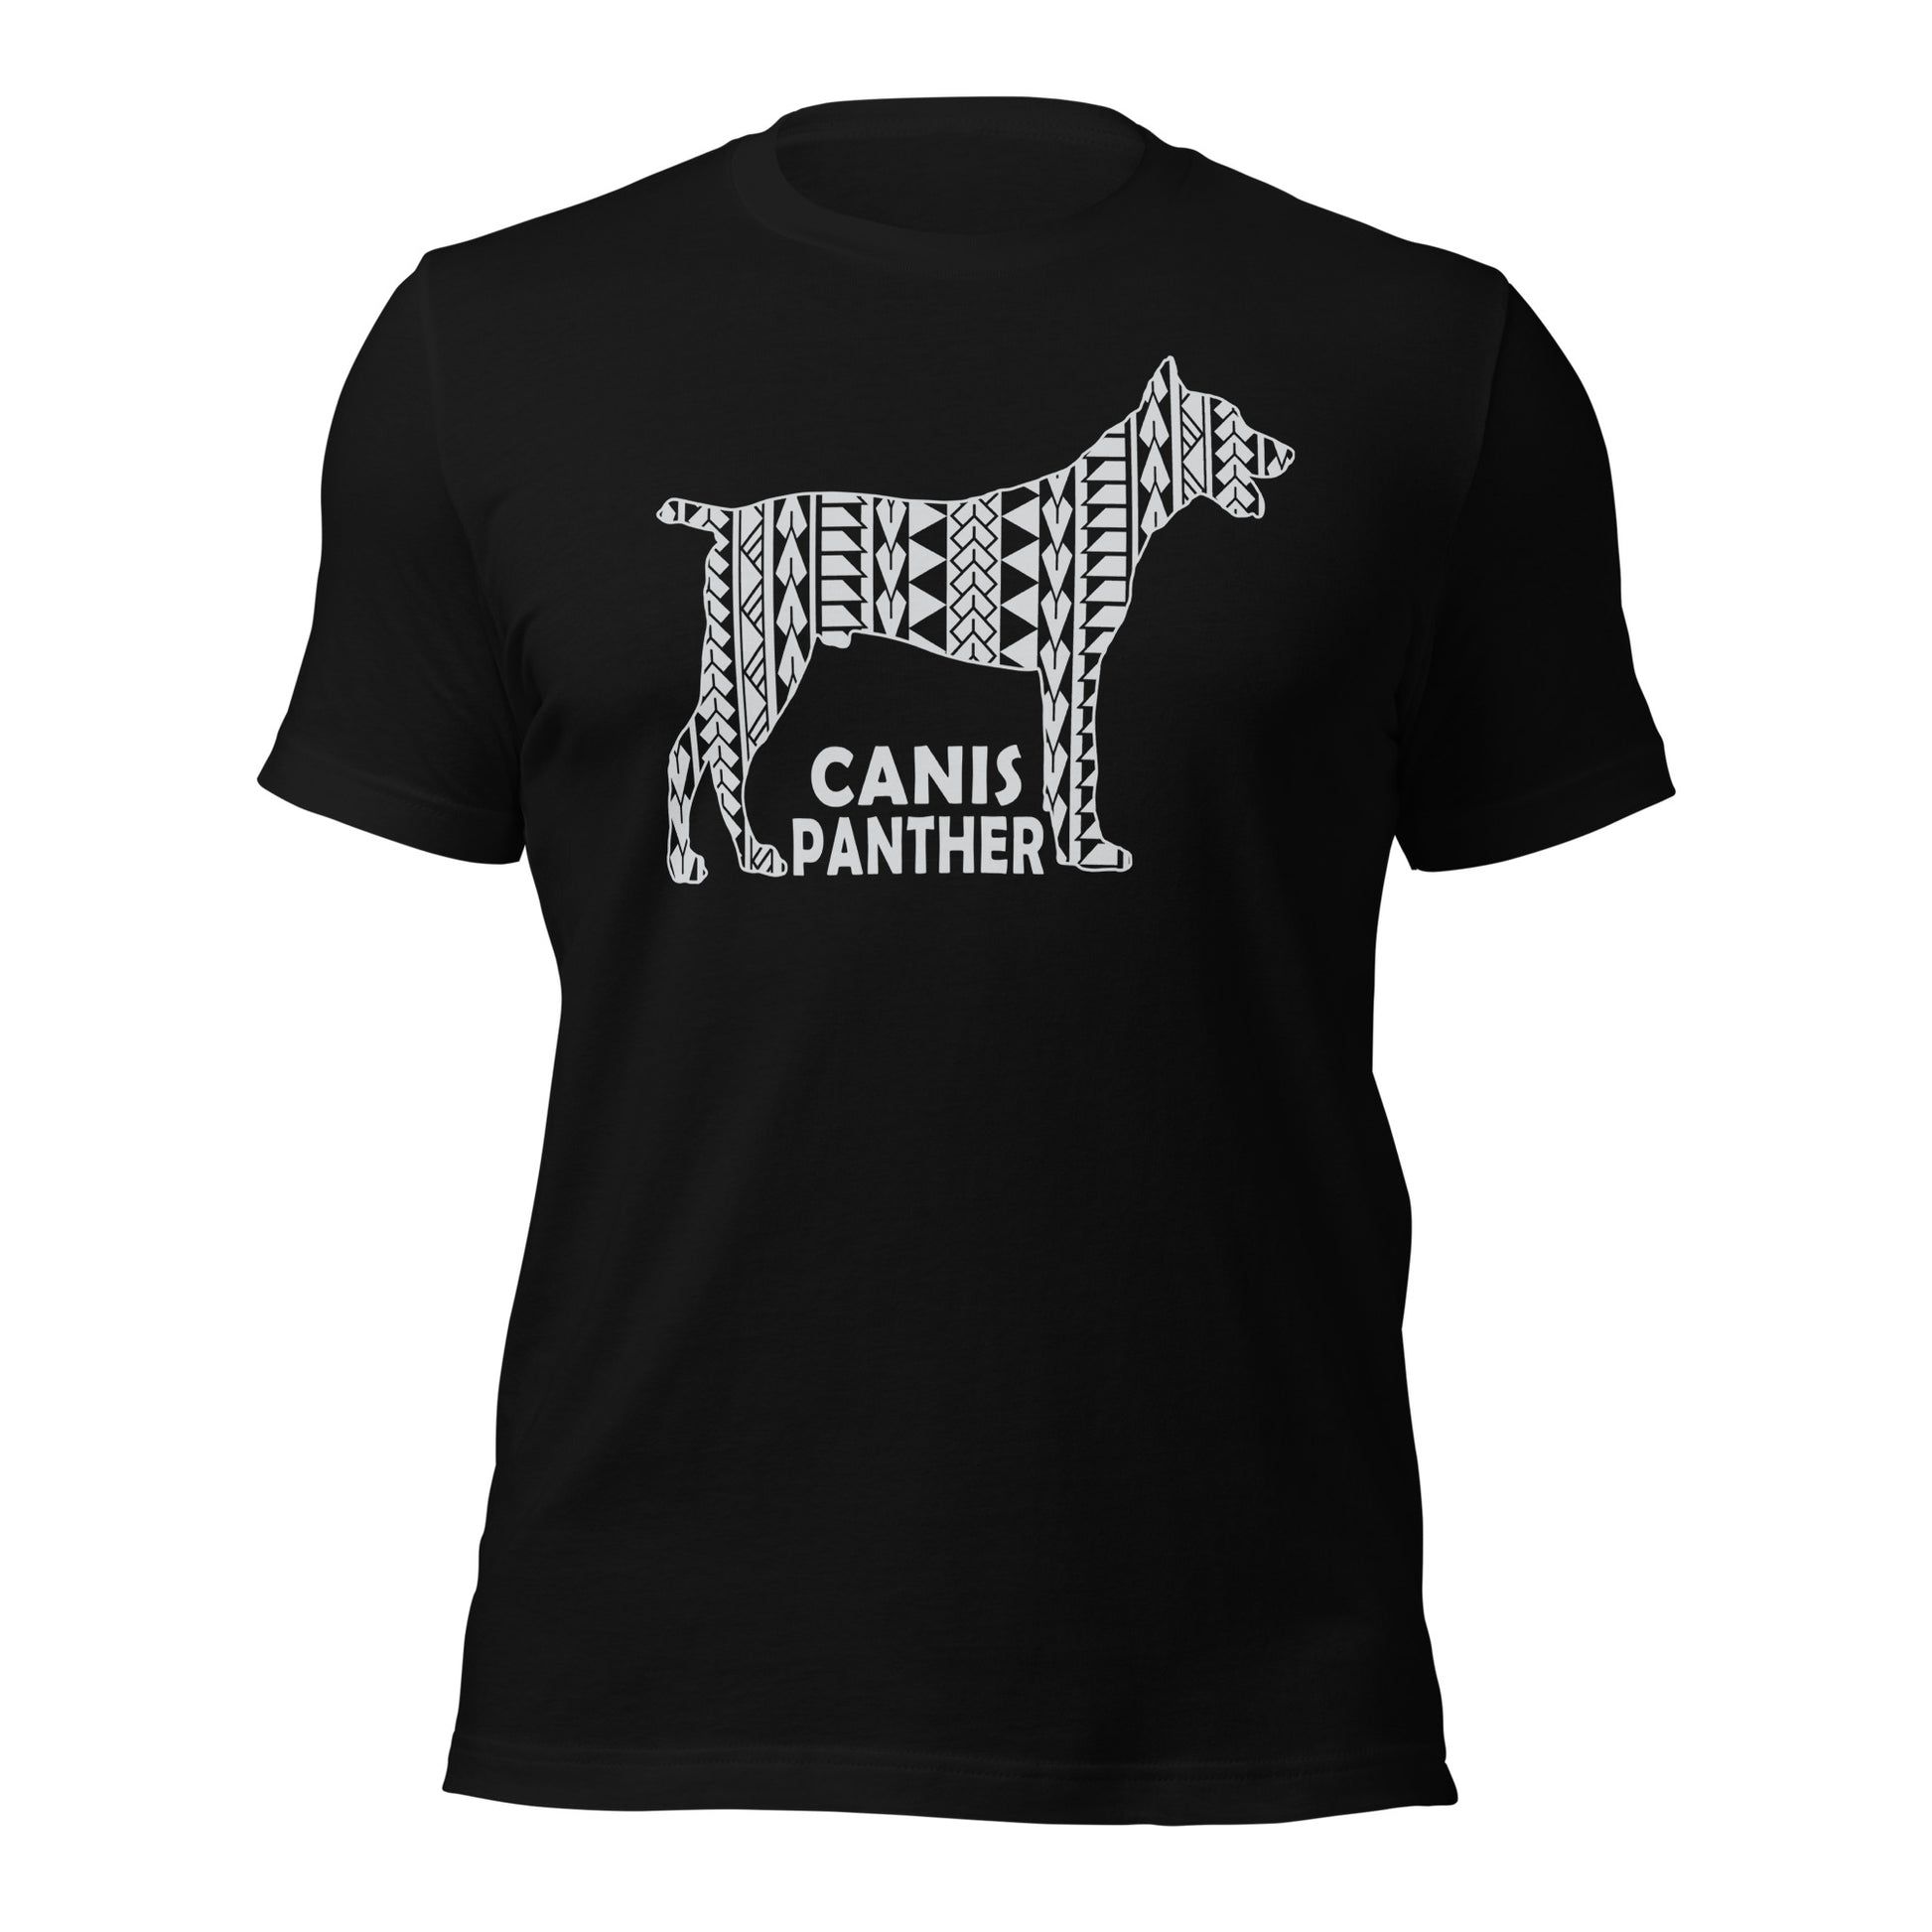 Canis Panther Polynesian t-shirt black by Dog Artistry.